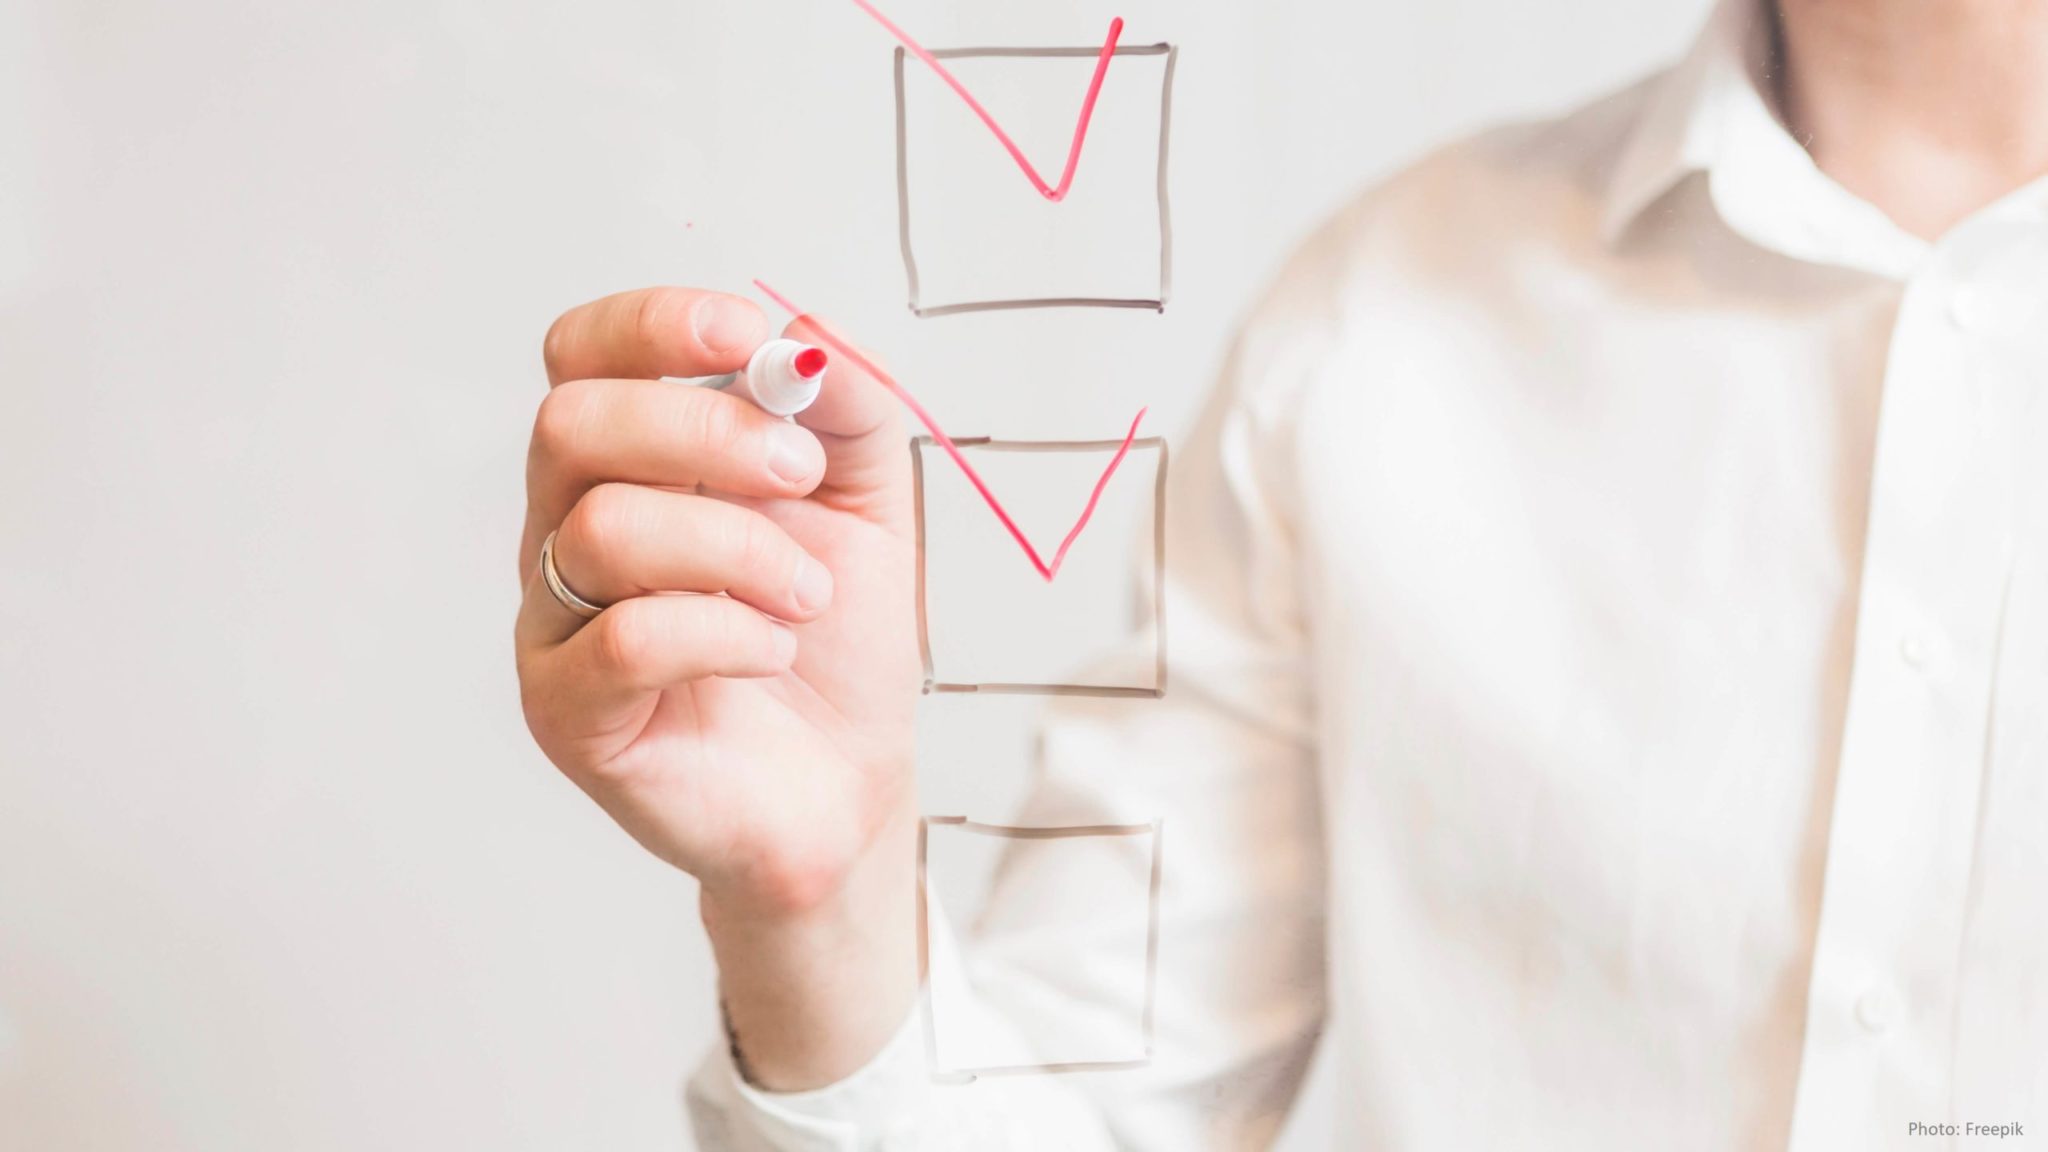 Outsourcing Checklist